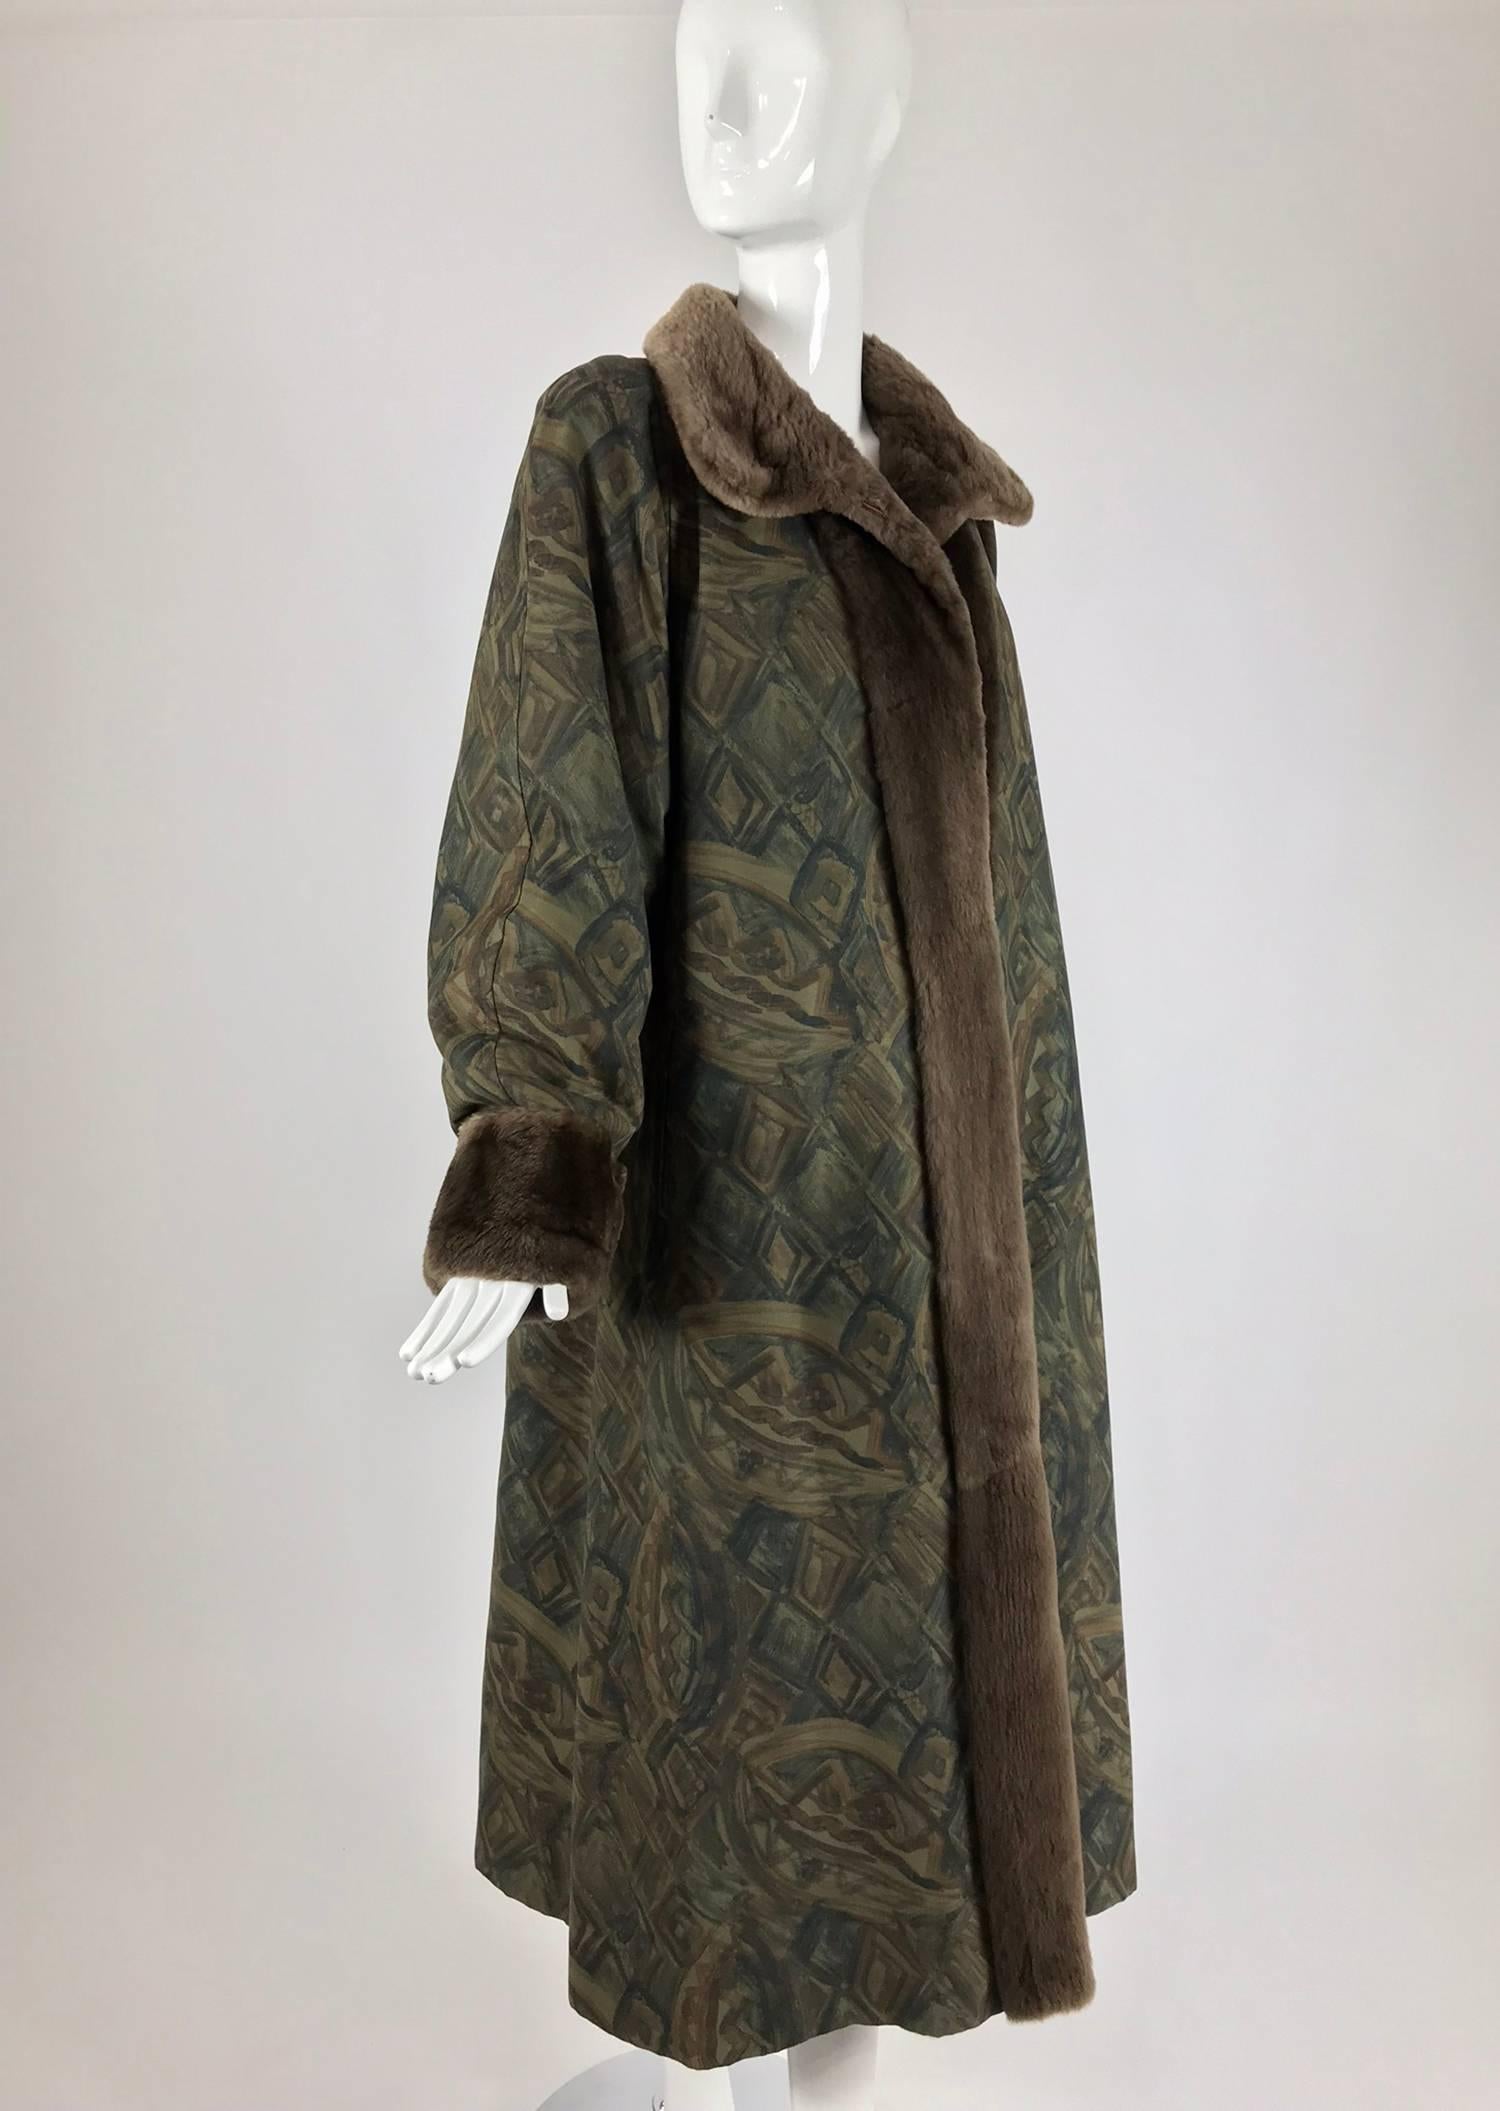 Anne Klein Reversible sheared beaver and fabric coat from the 1990s. The fabric print, in muted tones, gives the illusion of hand painting. Long full coat flares at the hem. Fully lined in soft soft sheared beaver fur. Long full sleeves with turn